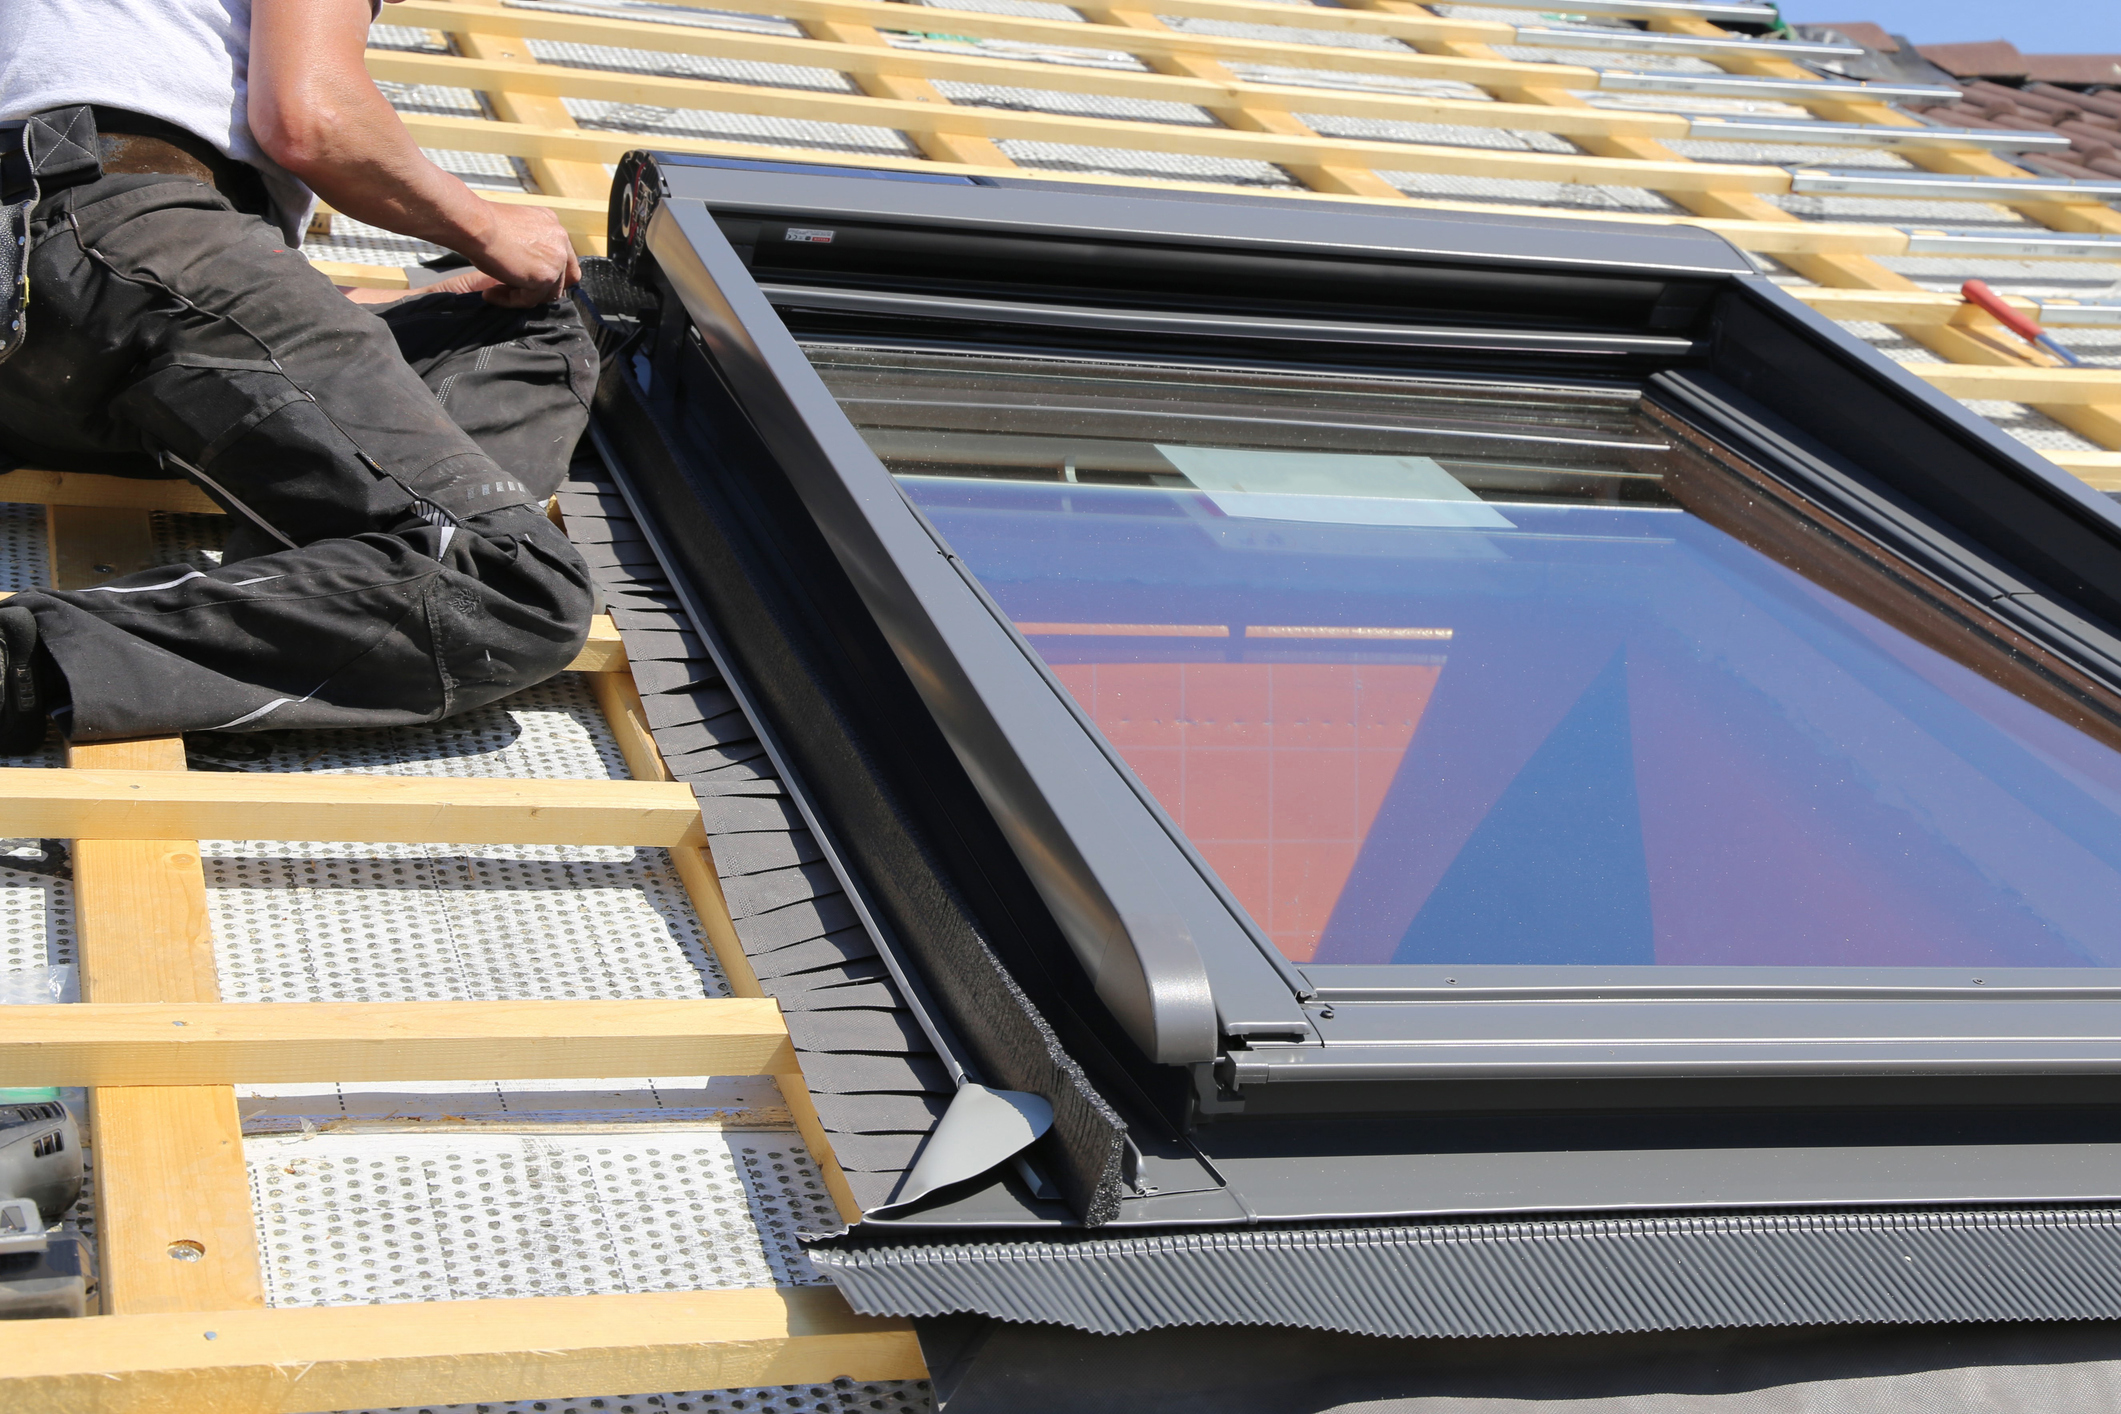 A skylight being installed by someone on an incomplete roof 